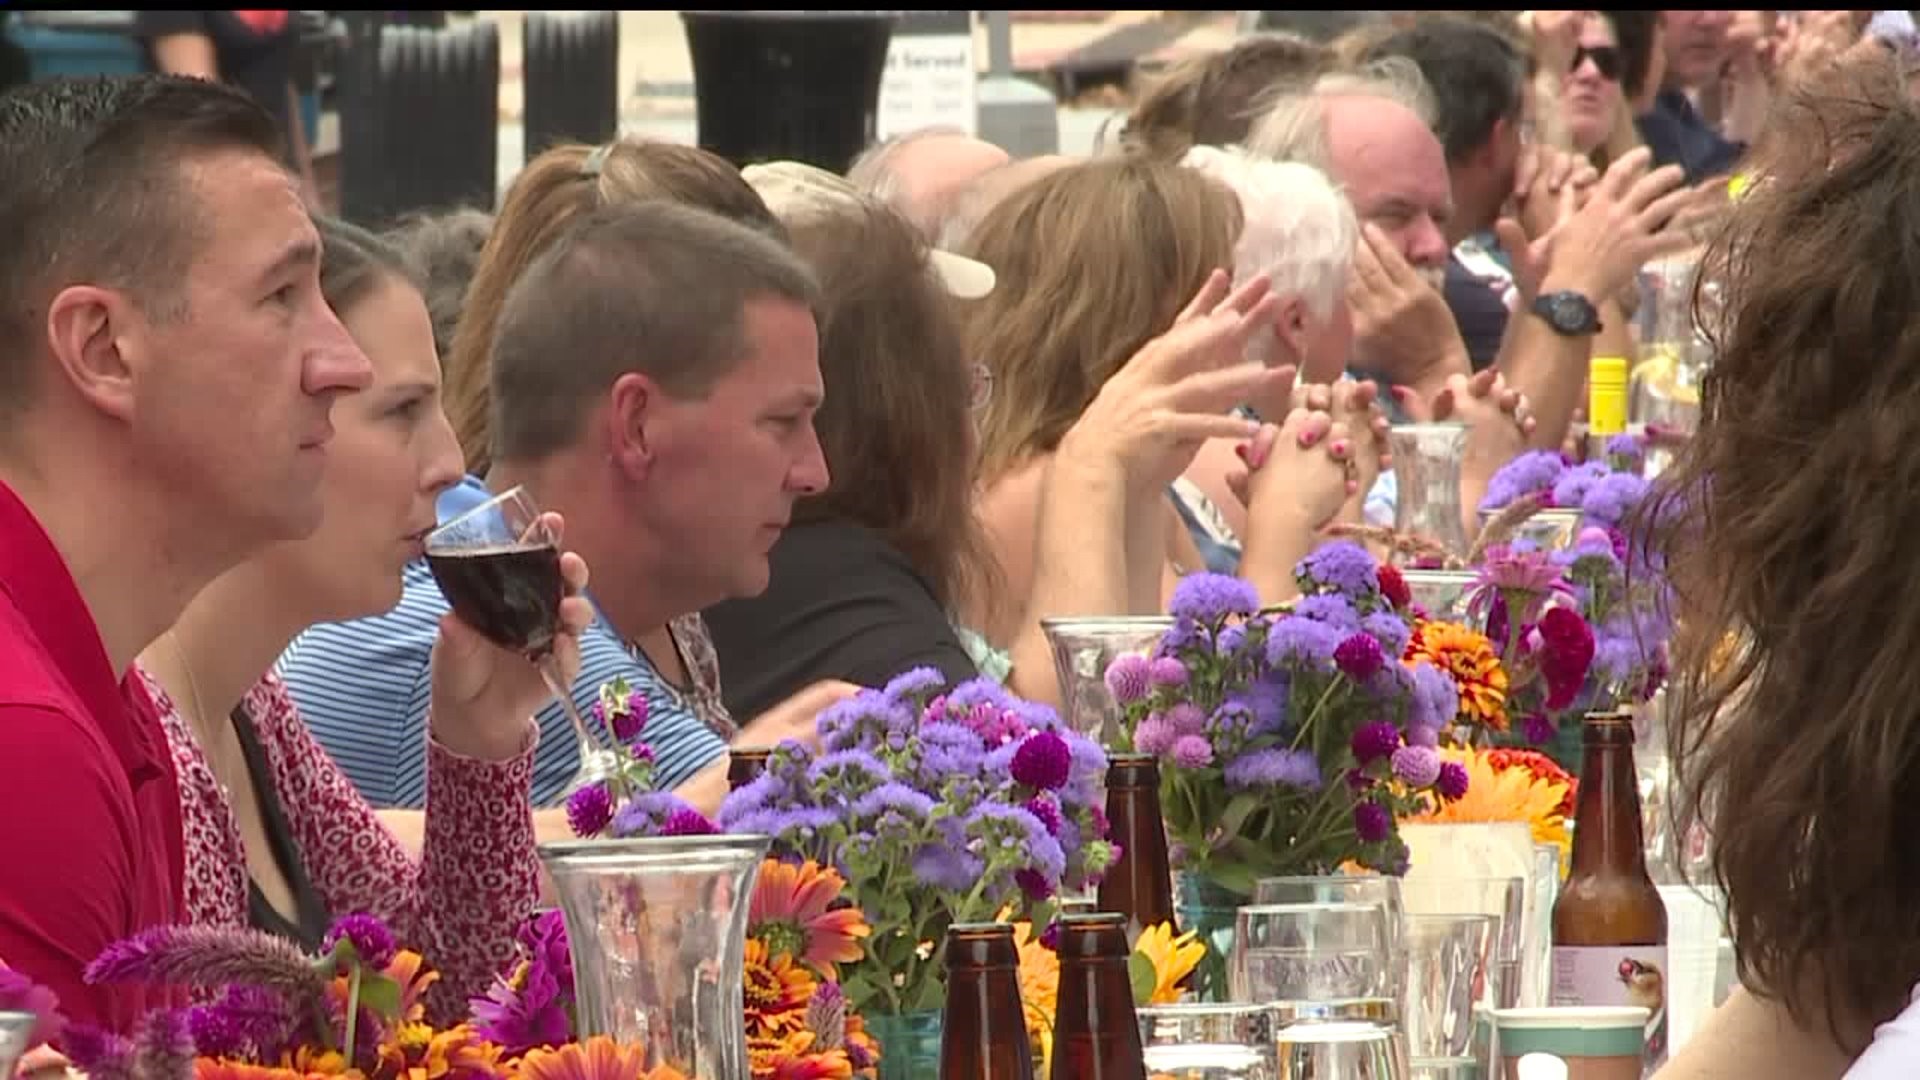 York County businesses, farms and wineries pitch in for Farm to City Dinner